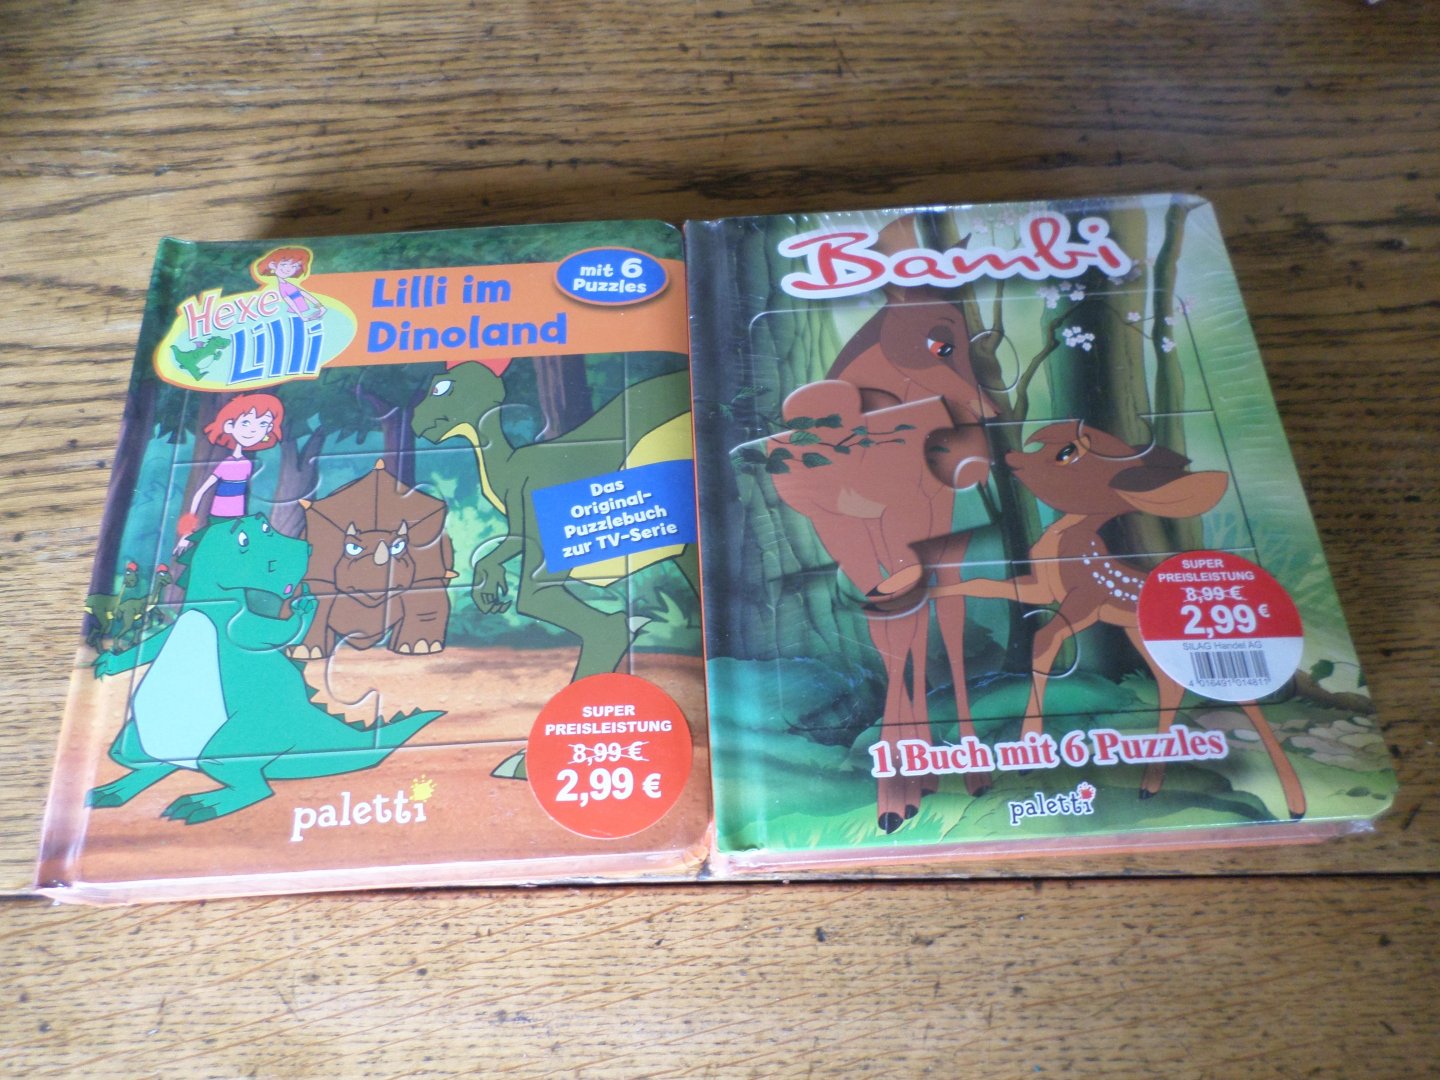  - Bambi 1 buch mit 6 puzzles